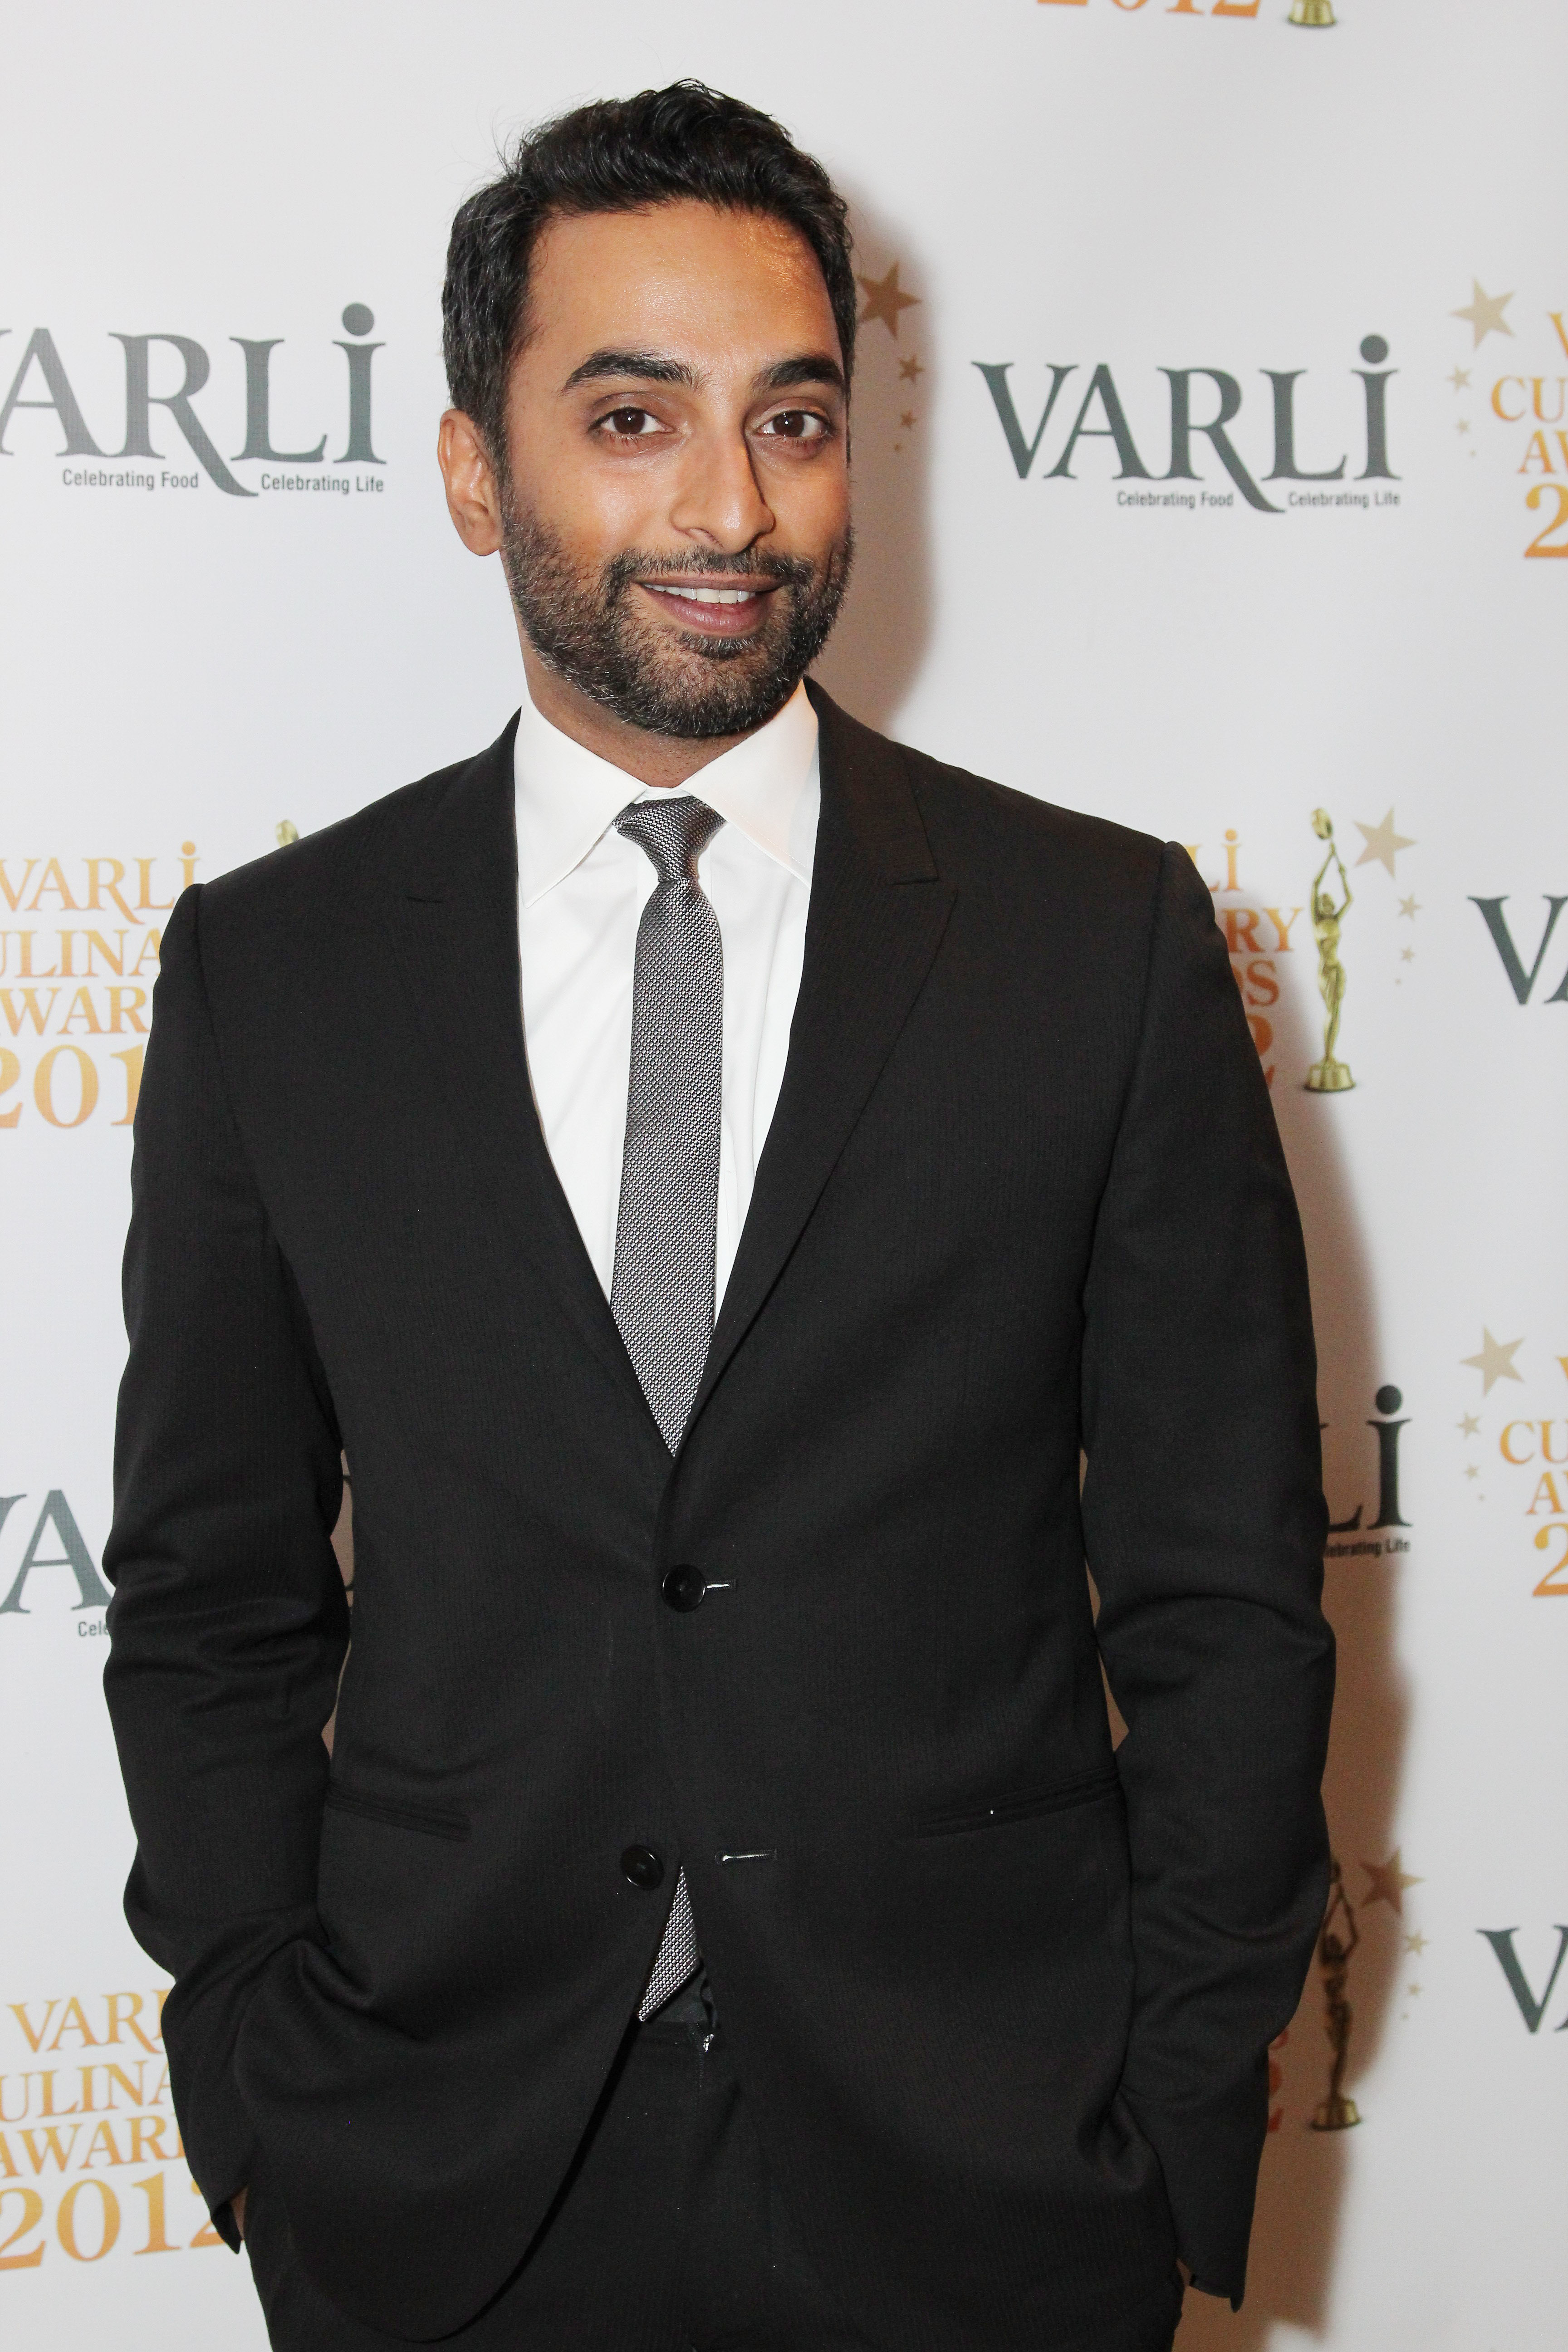 November 15, 2012: First Annual Varli Culinary Awards, co-host Manu Narayan on the red carpet at The Altman Building in New York City.